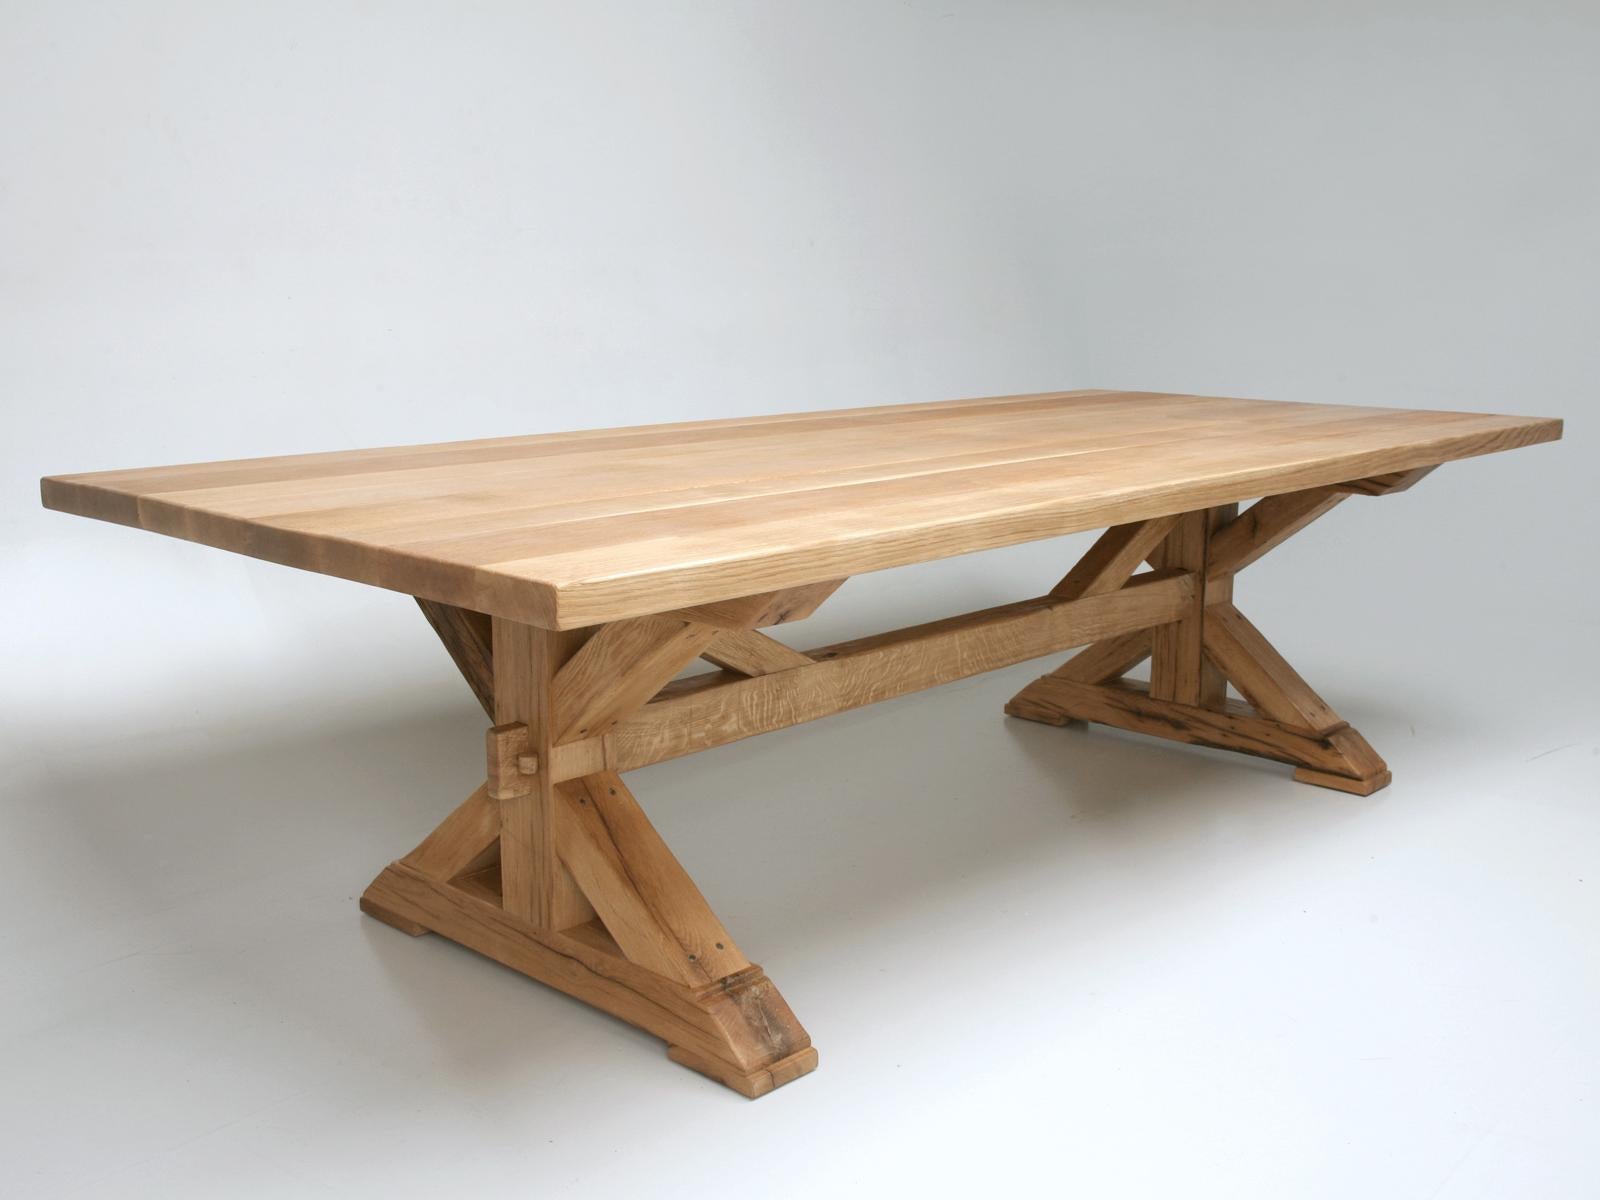 Stunning custom hand-made Country French Style in Reclaimed Oak Farm Table of Dining Room or Kitchen Table precisely copied from a real 18th century French Farm Table we found in France. This table is hand-crafted here in our Chicago Old Plank